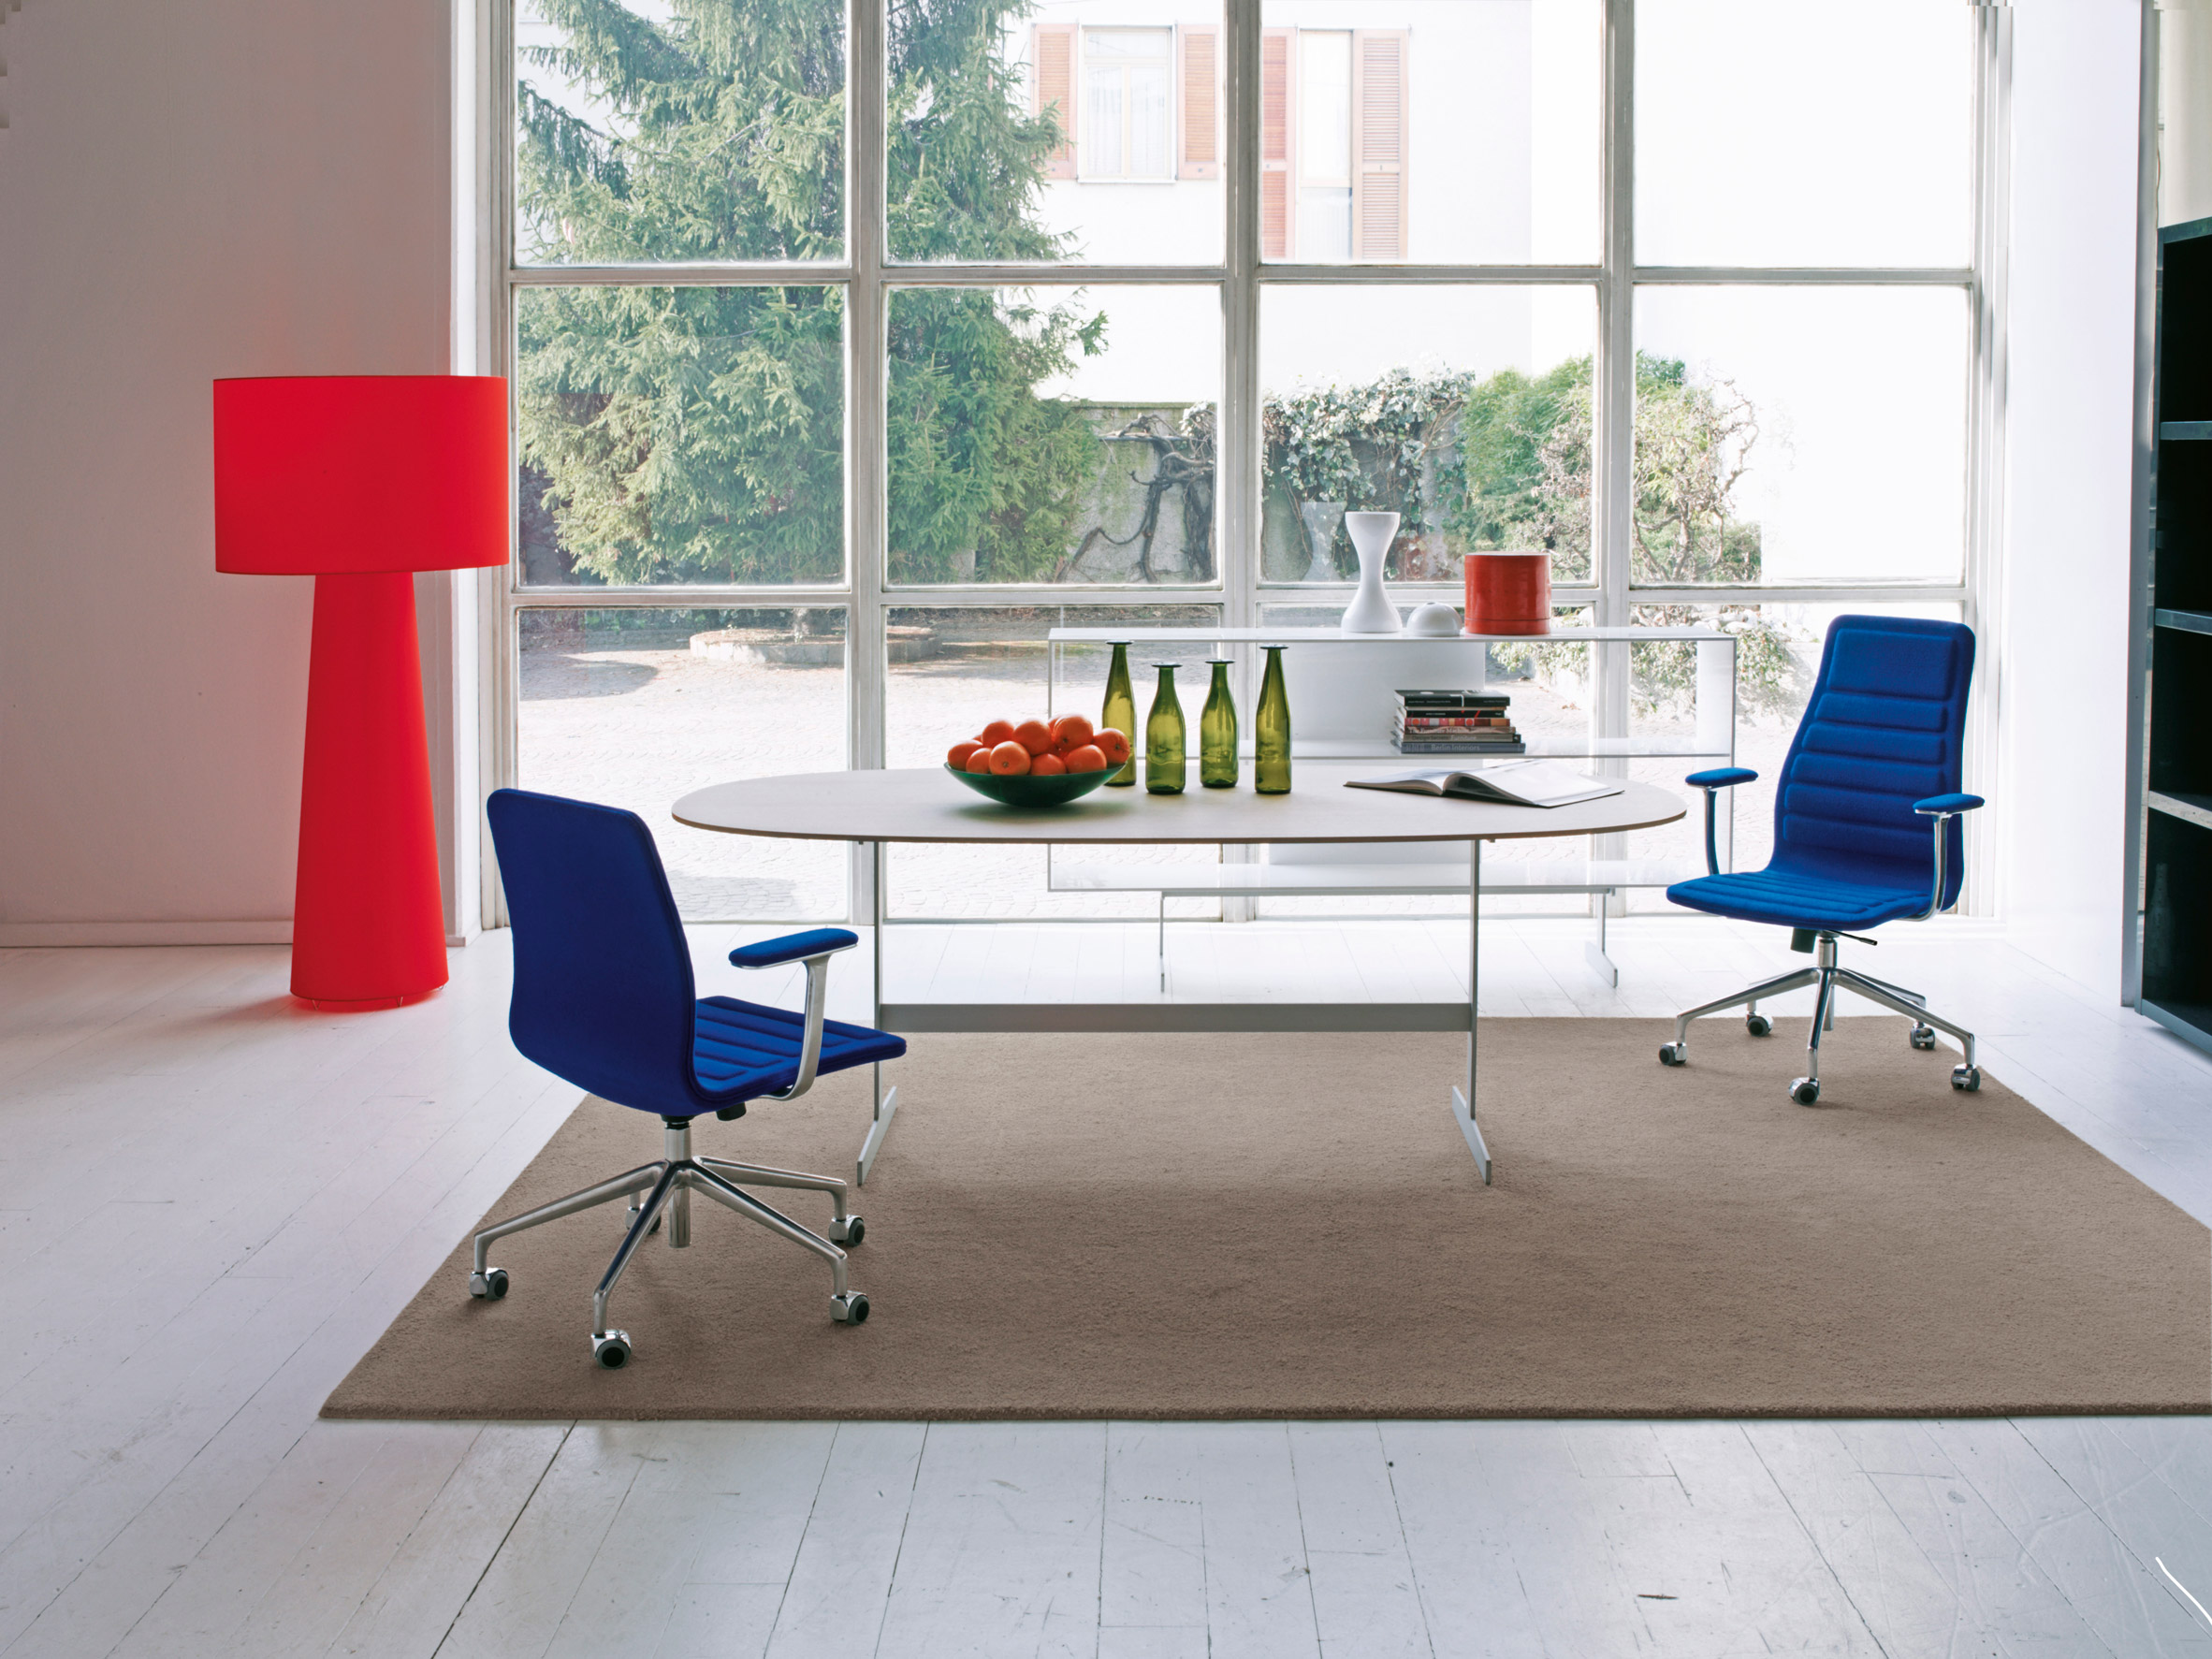 Lotus and Lotus Attesa by Cappellini and Jasper Morrison